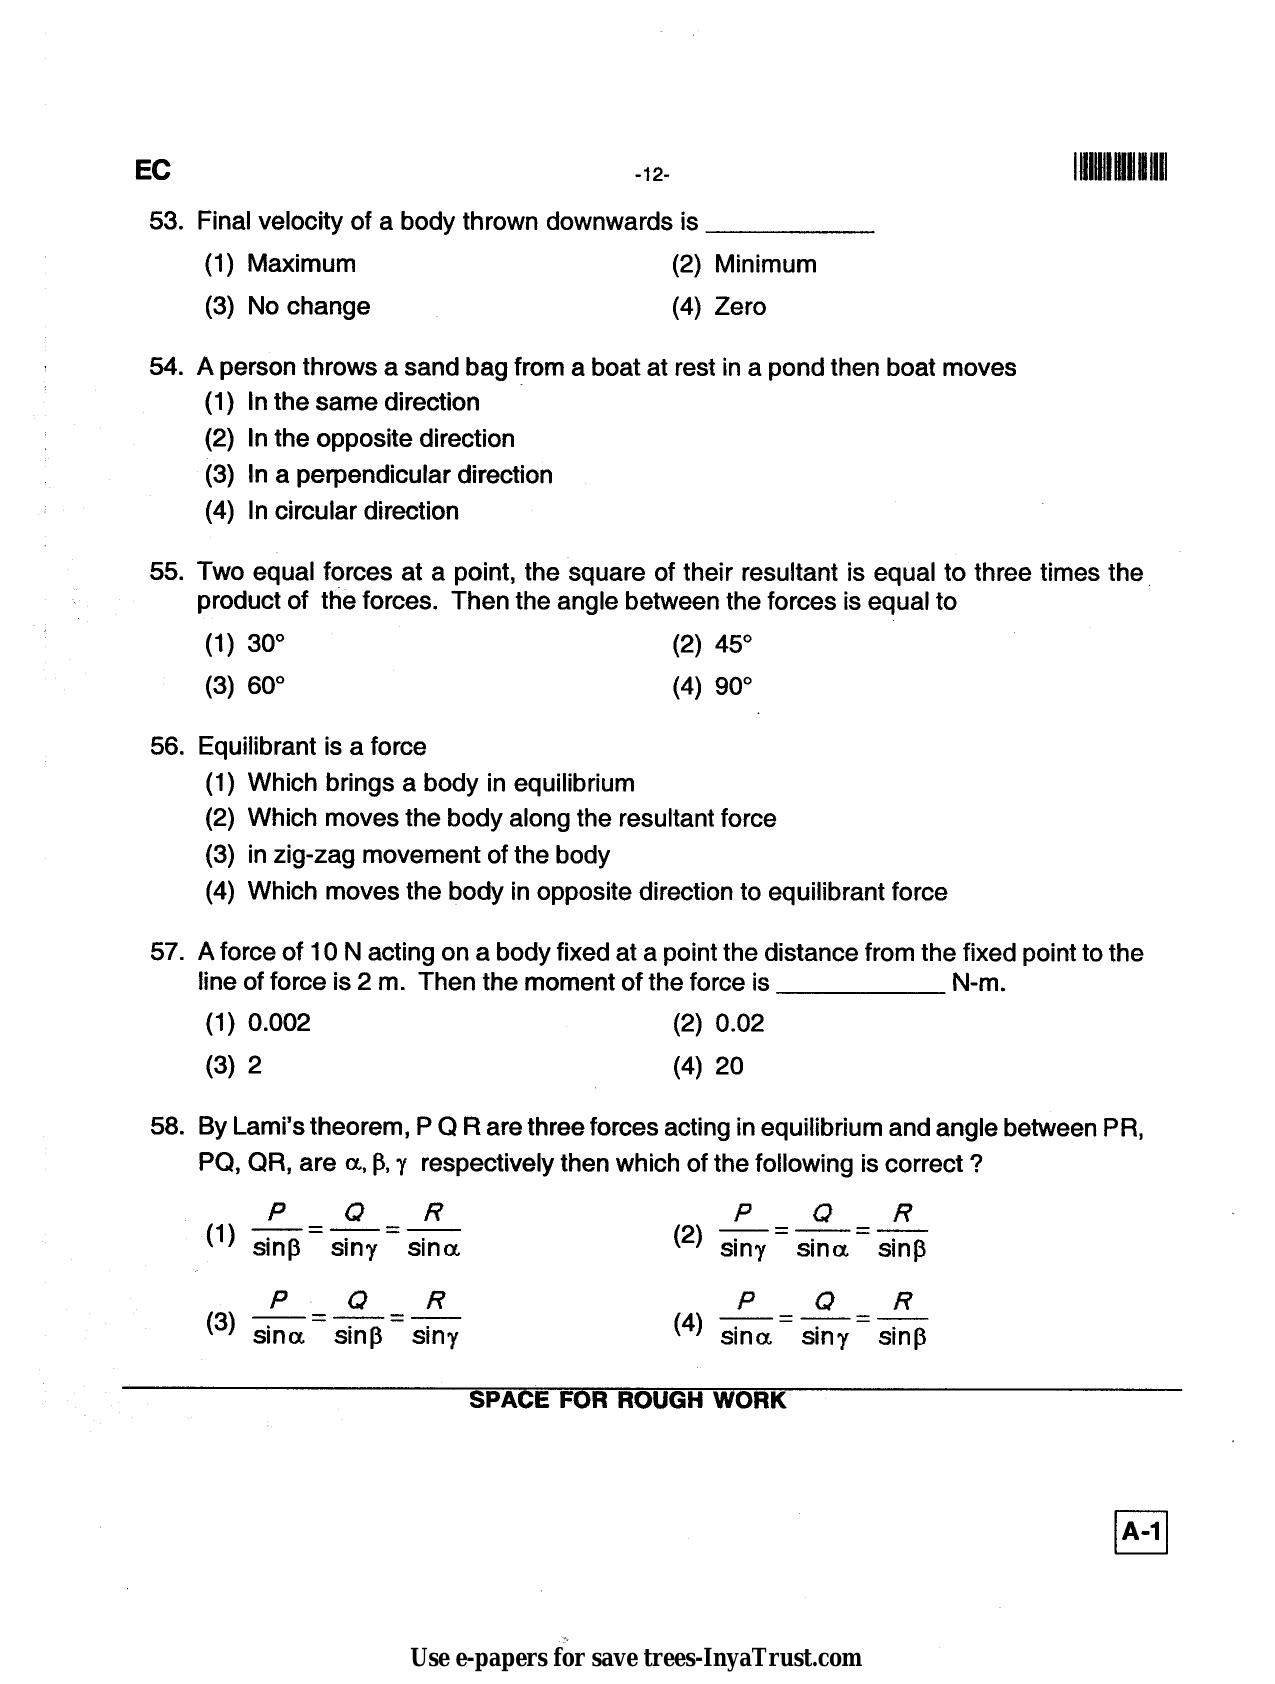 Karnataka Diploma CET- 2013 Electronics and Communication Engineering Question Paper - Page 12